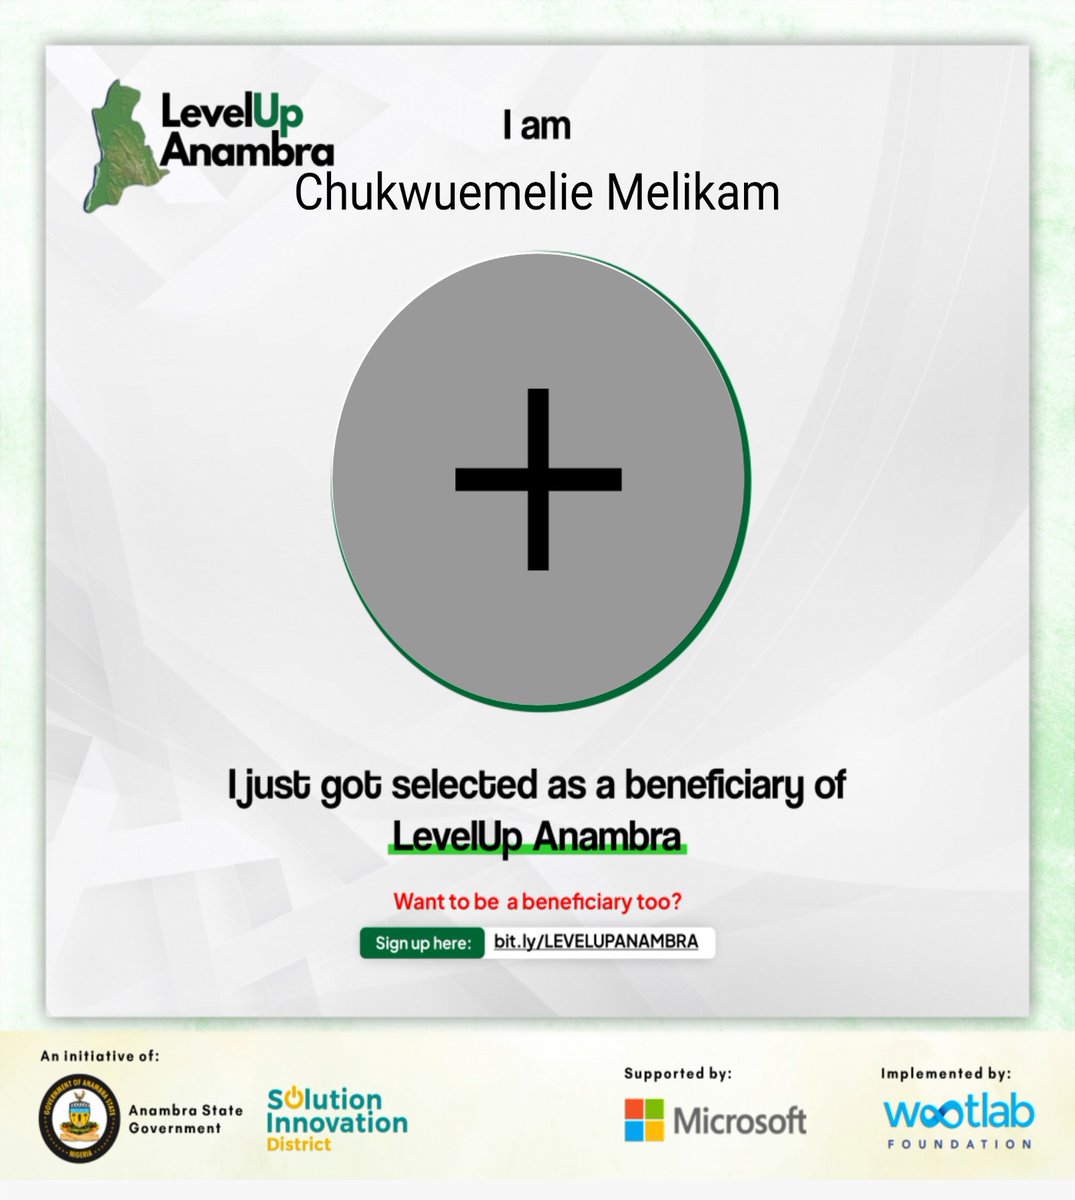 I have been accepted into the Cohort-2 of the LevelUp Anambra Digital Skills Training Program; Powered by the Solution Innovation District of Anambra State Government in Partnership with Microsoft and Wootlab Foundation (implementing partners).